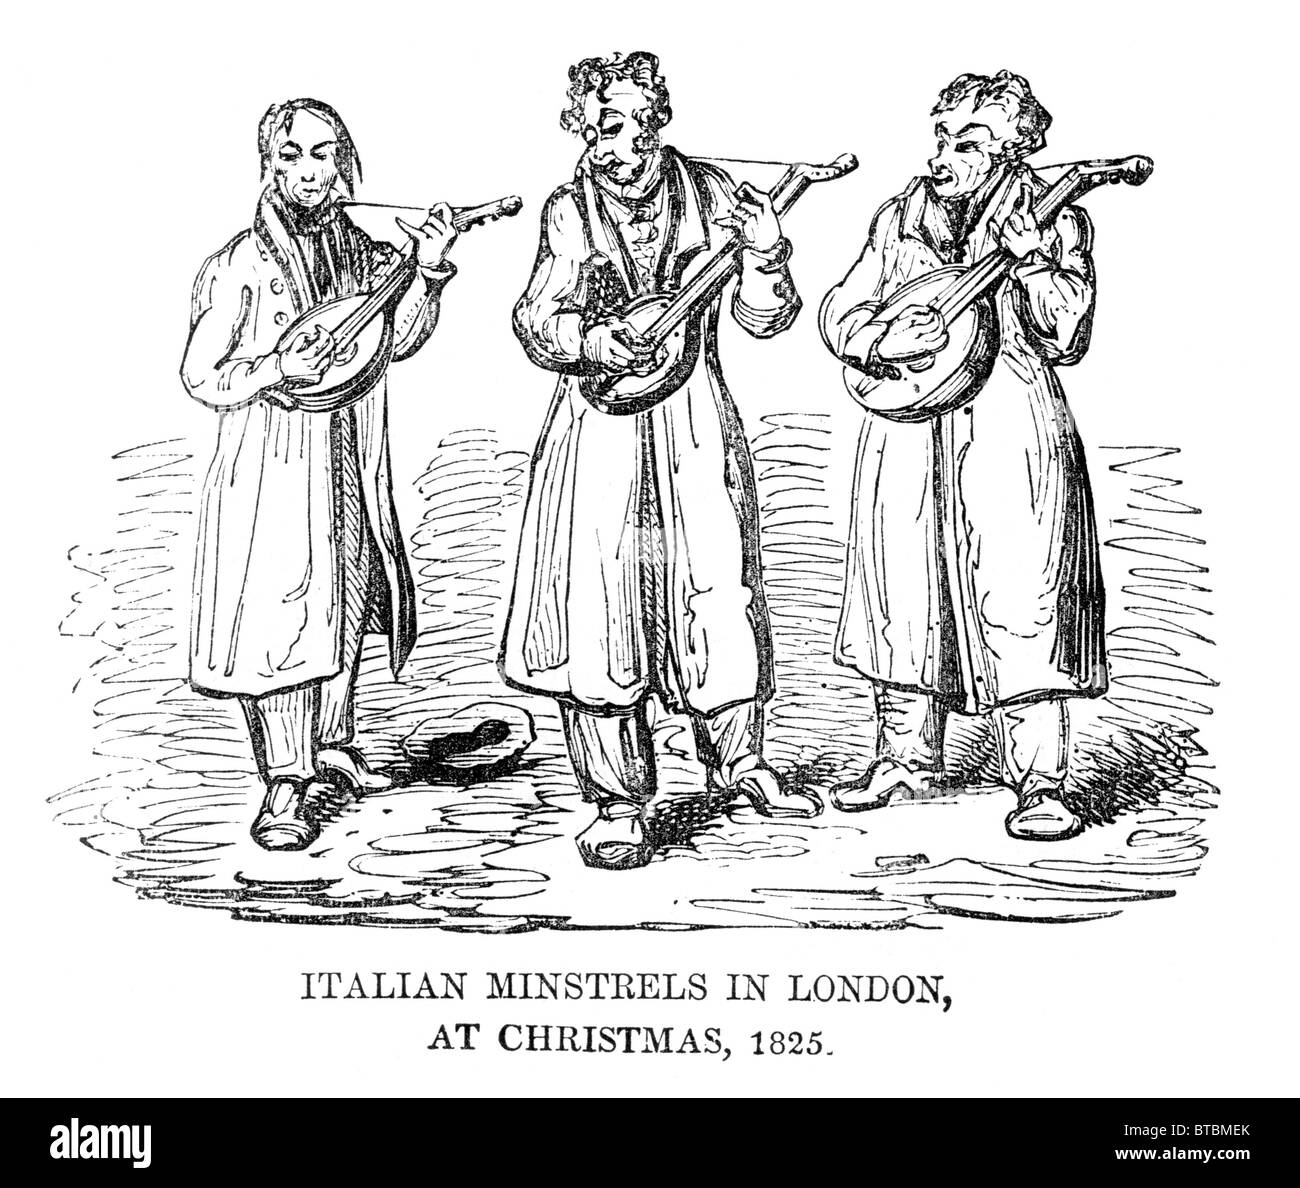 Italian minstrels in London at Christmas 1825; Black and White Illustration from William Hone's Everyday Book Stock Photo